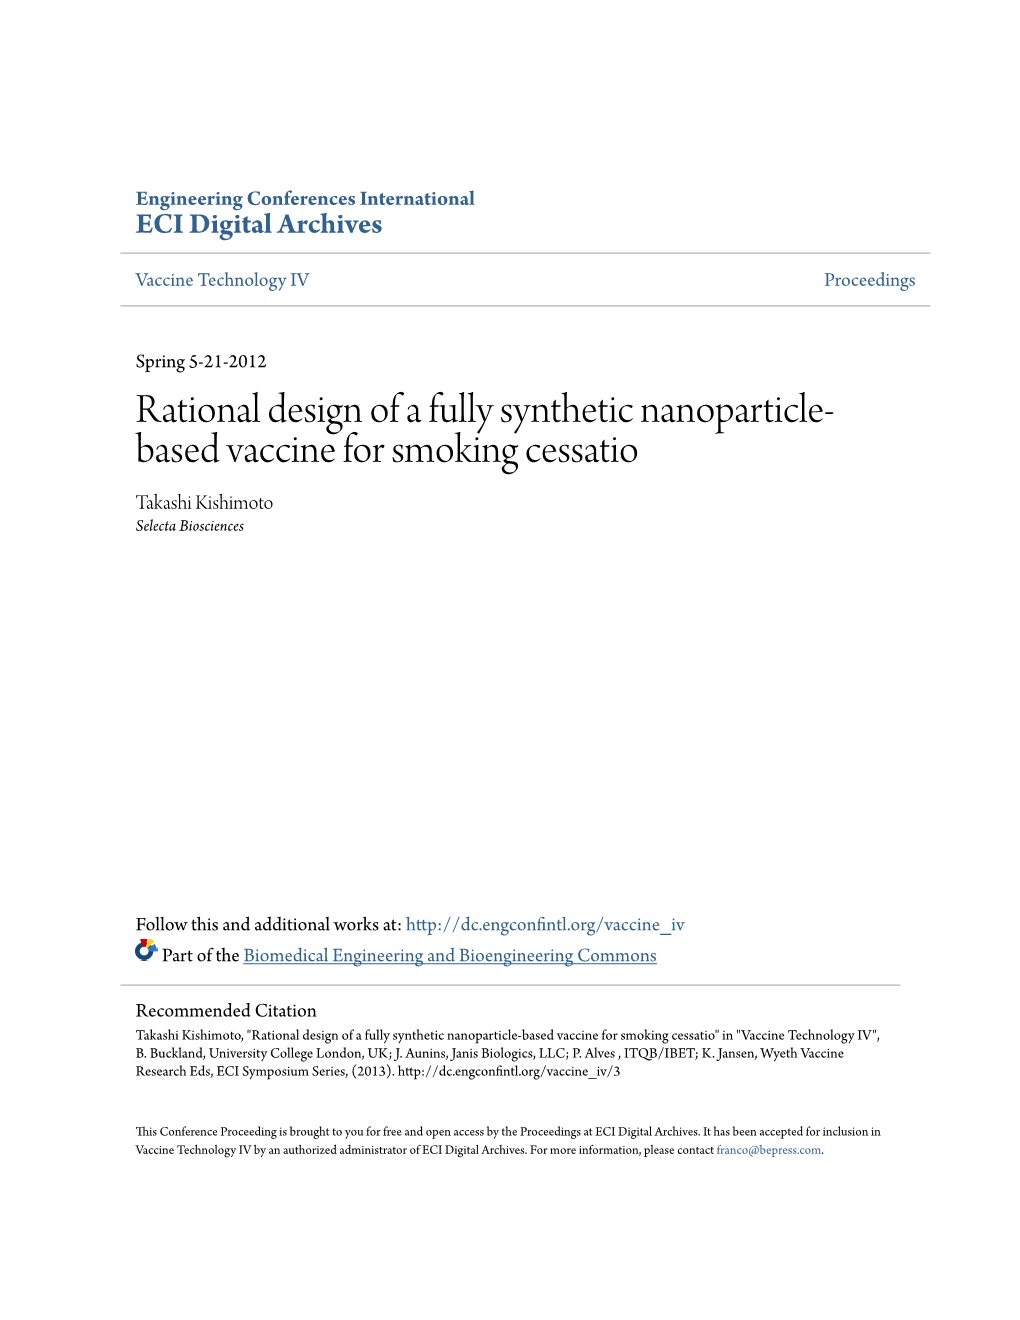 Rational Design of a Fully Synthetic Nanoparticle-Based Vaccine for Smoking Cessatio" in "Vaccine Technology IV", B